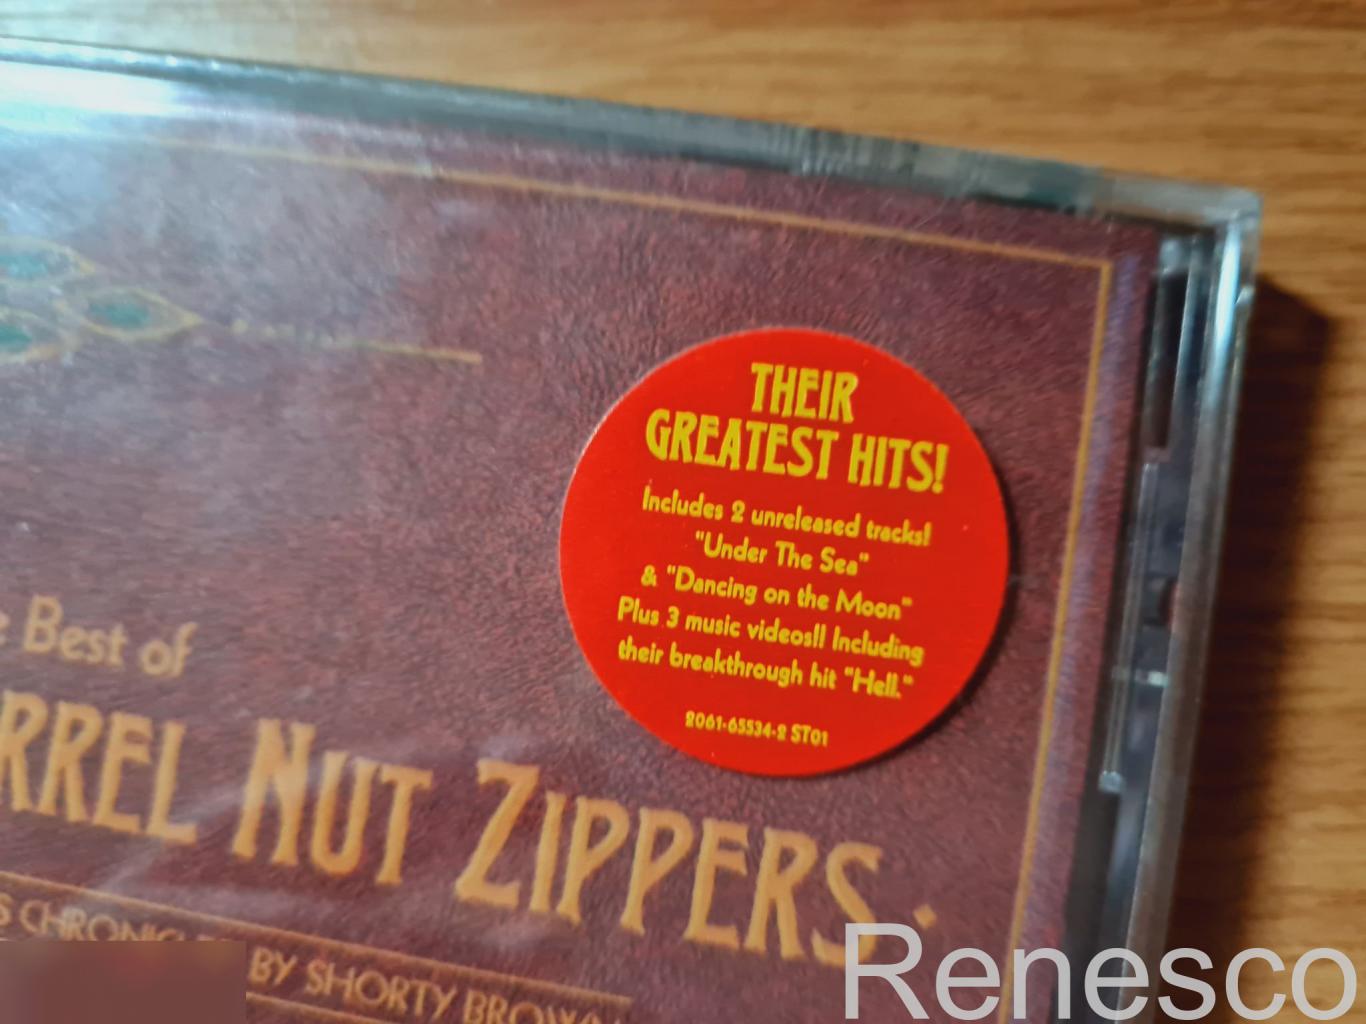 Squirrel Nut Zippers ?– The Best Of Squirrel Nut Zippers As Chronicled By Shorty 1